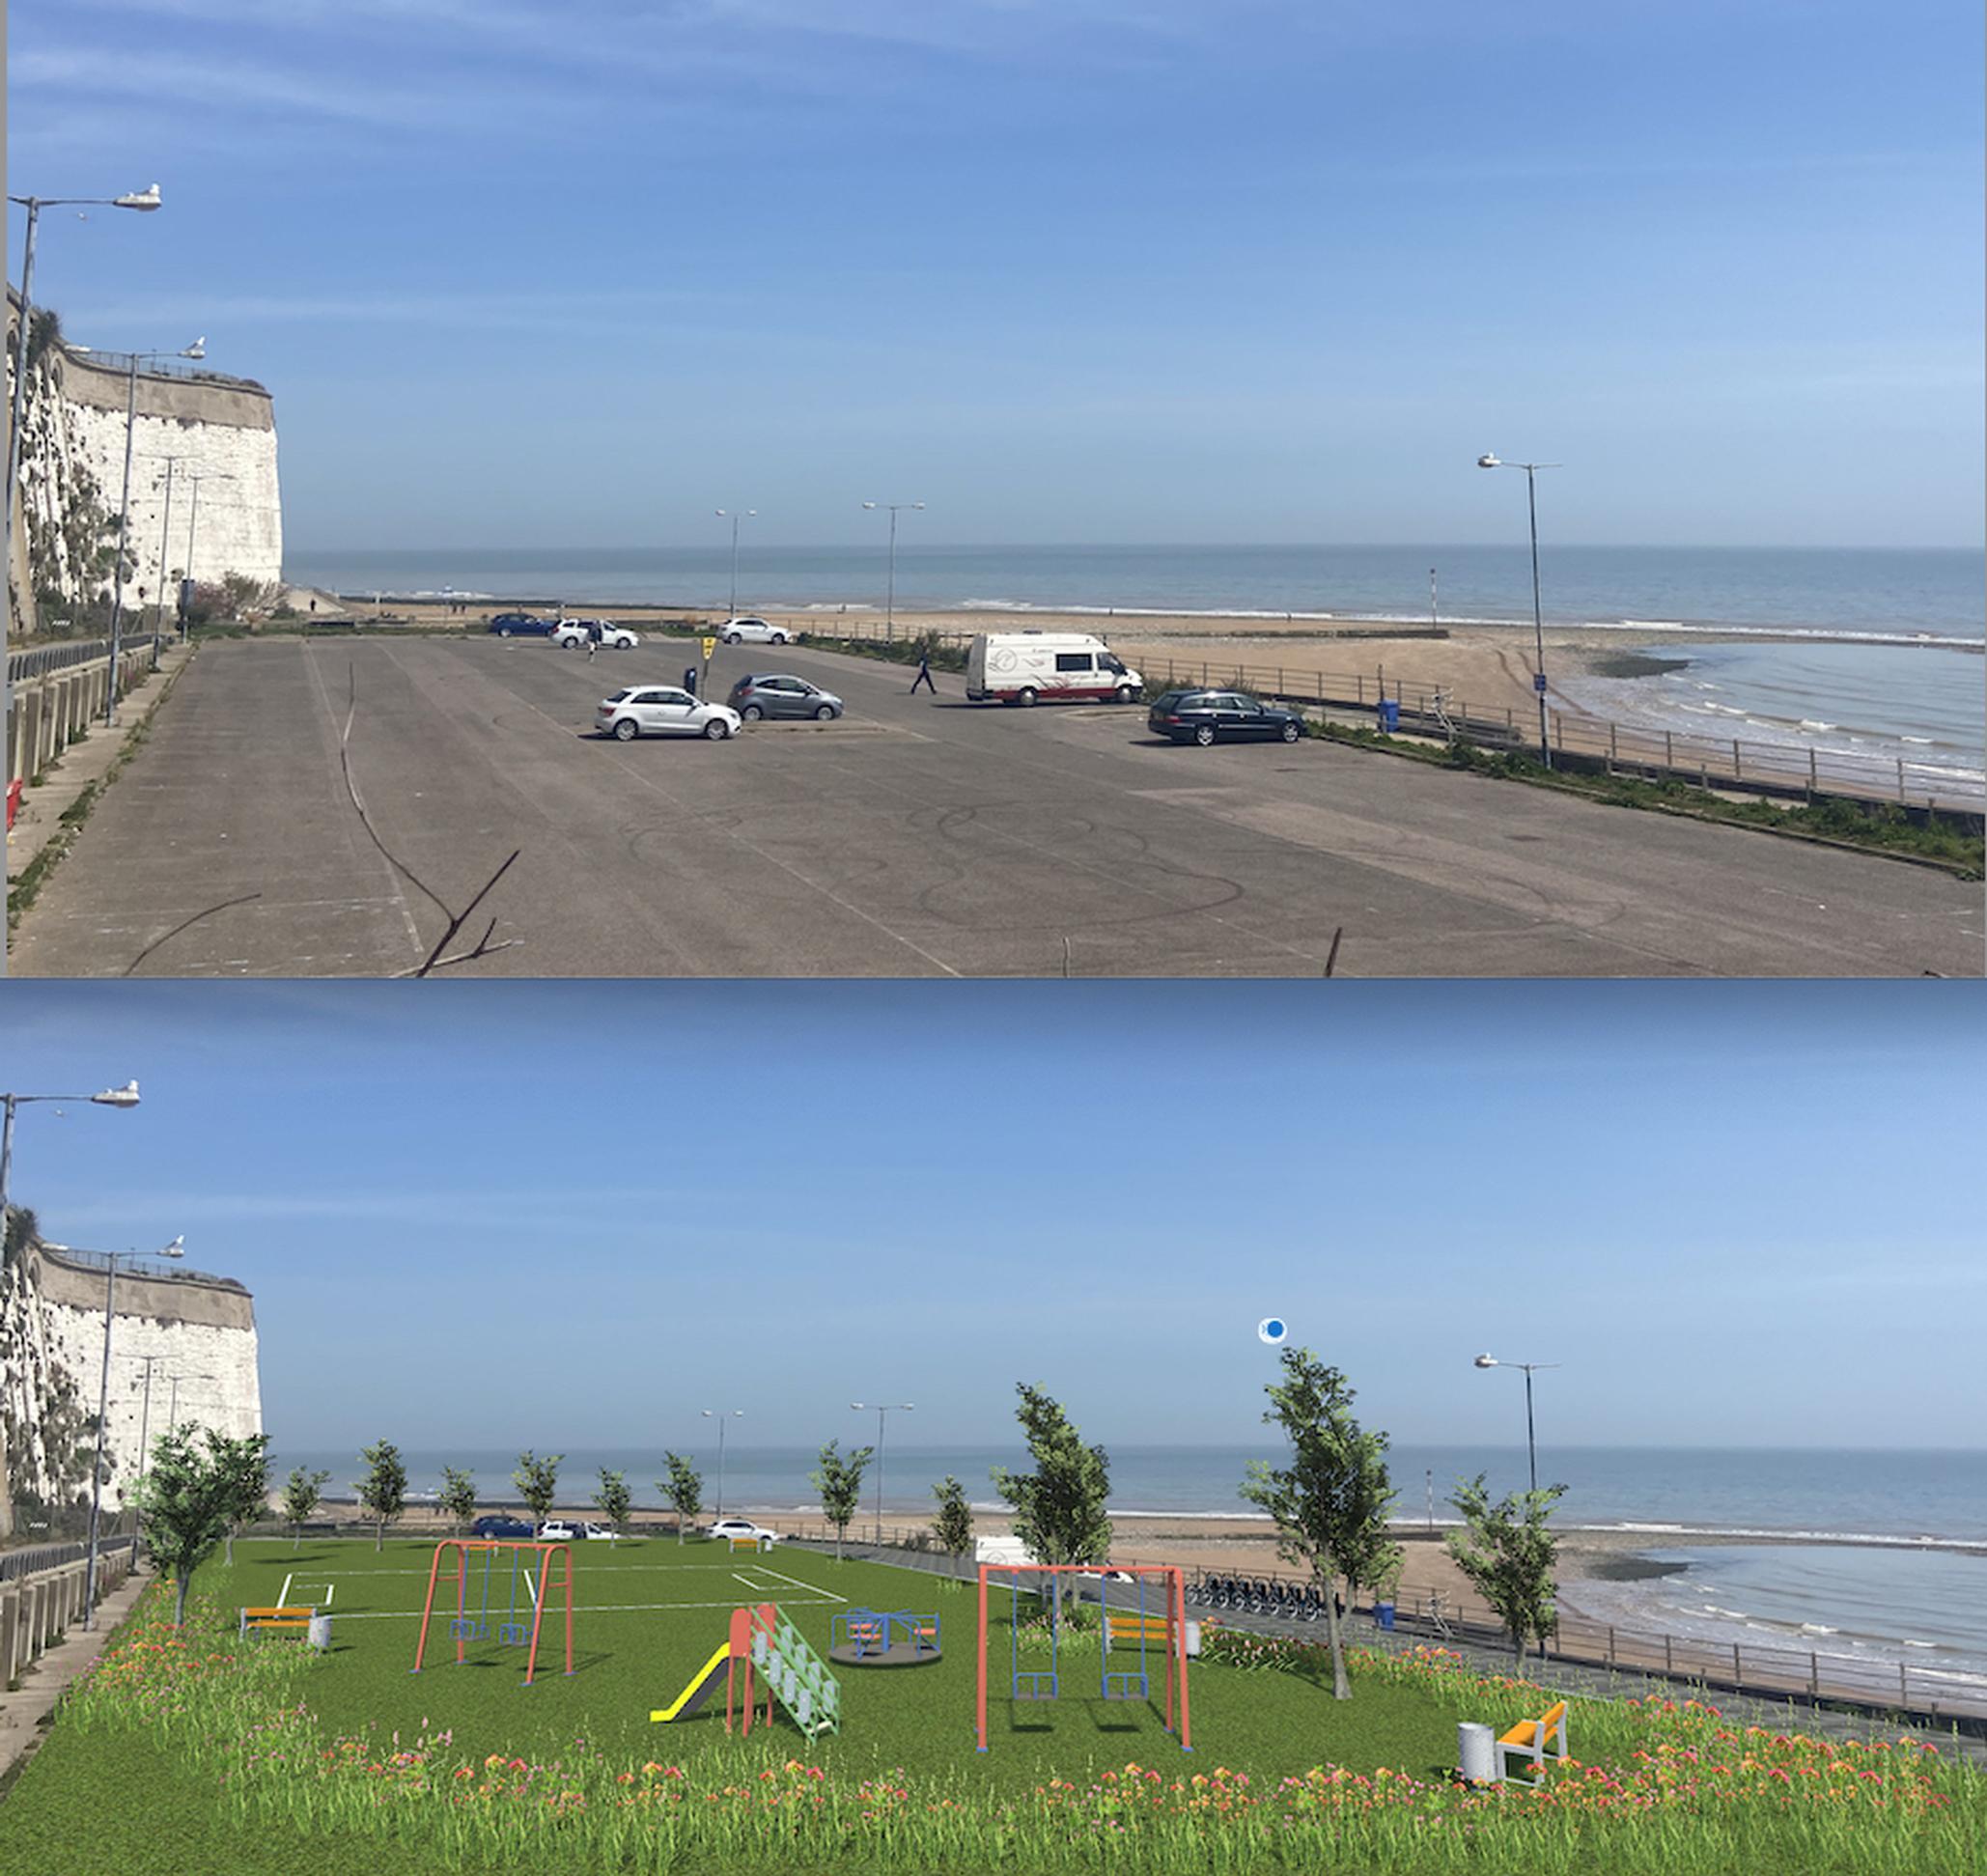 A BetaStreet visualisation of a car park in Ramsgate, Kent